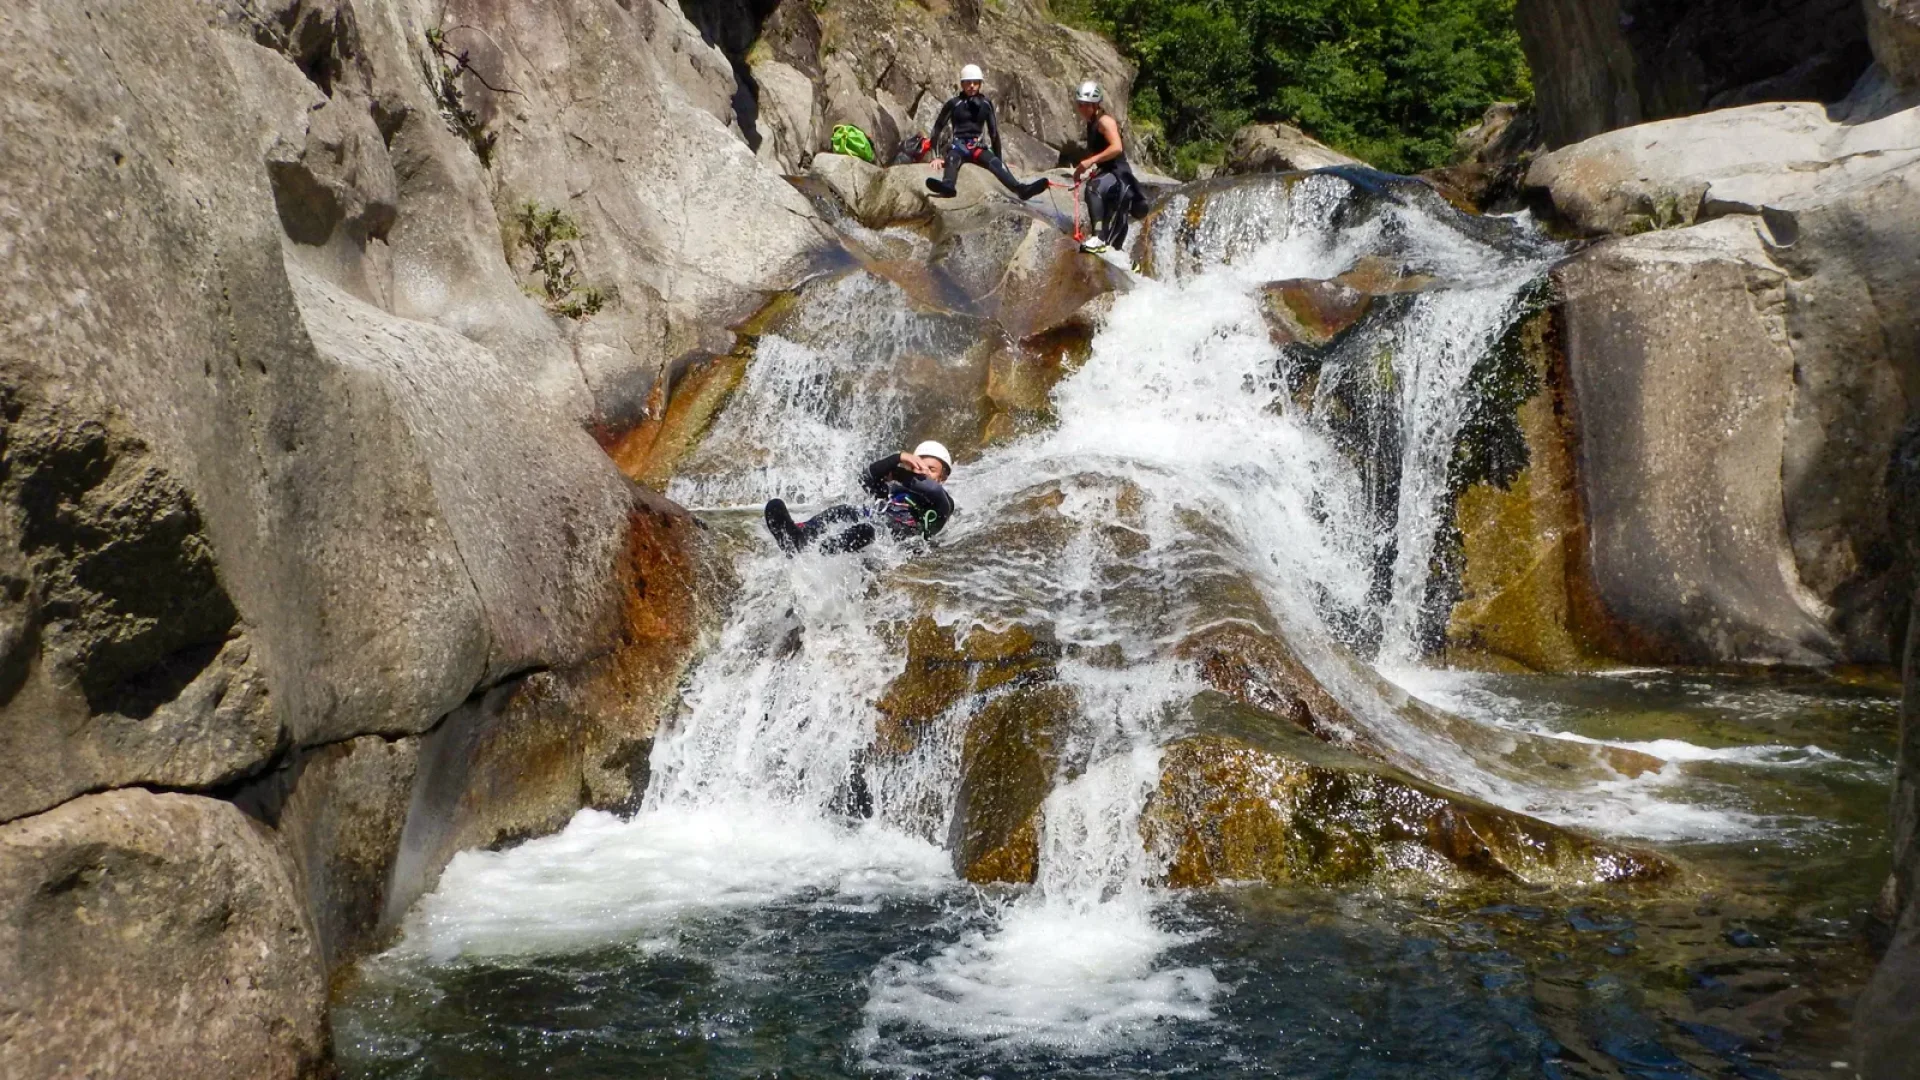 Group practicing canyoning with the "Bureau des moniteurs"